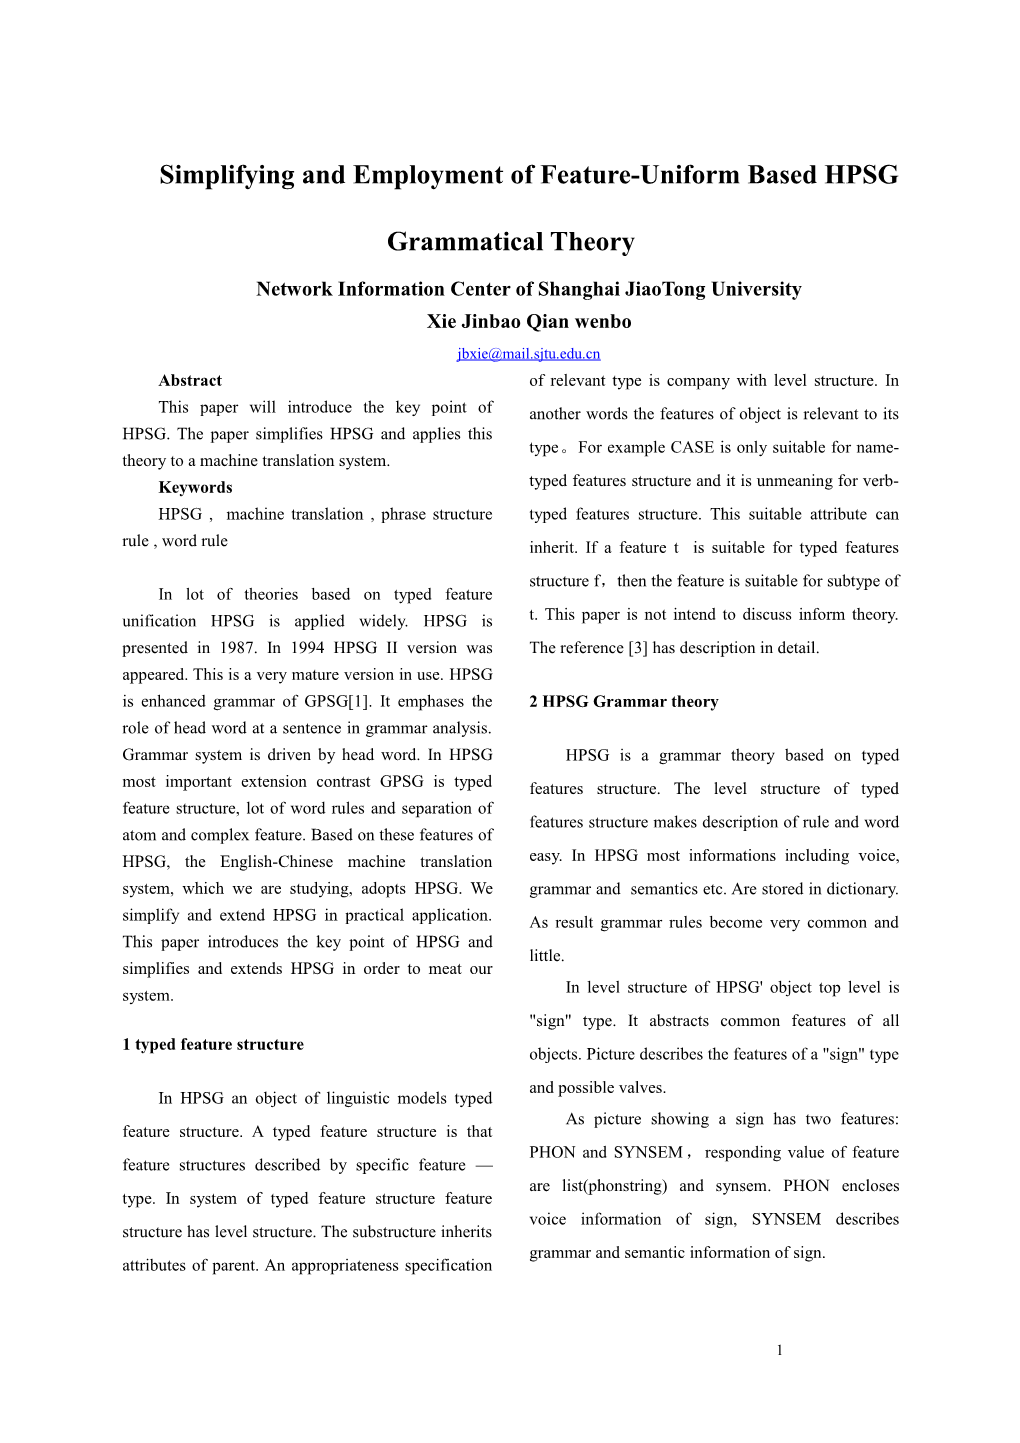 Simplifying and Employment of Feature-Uniform Based HPSG Grammatical Theory